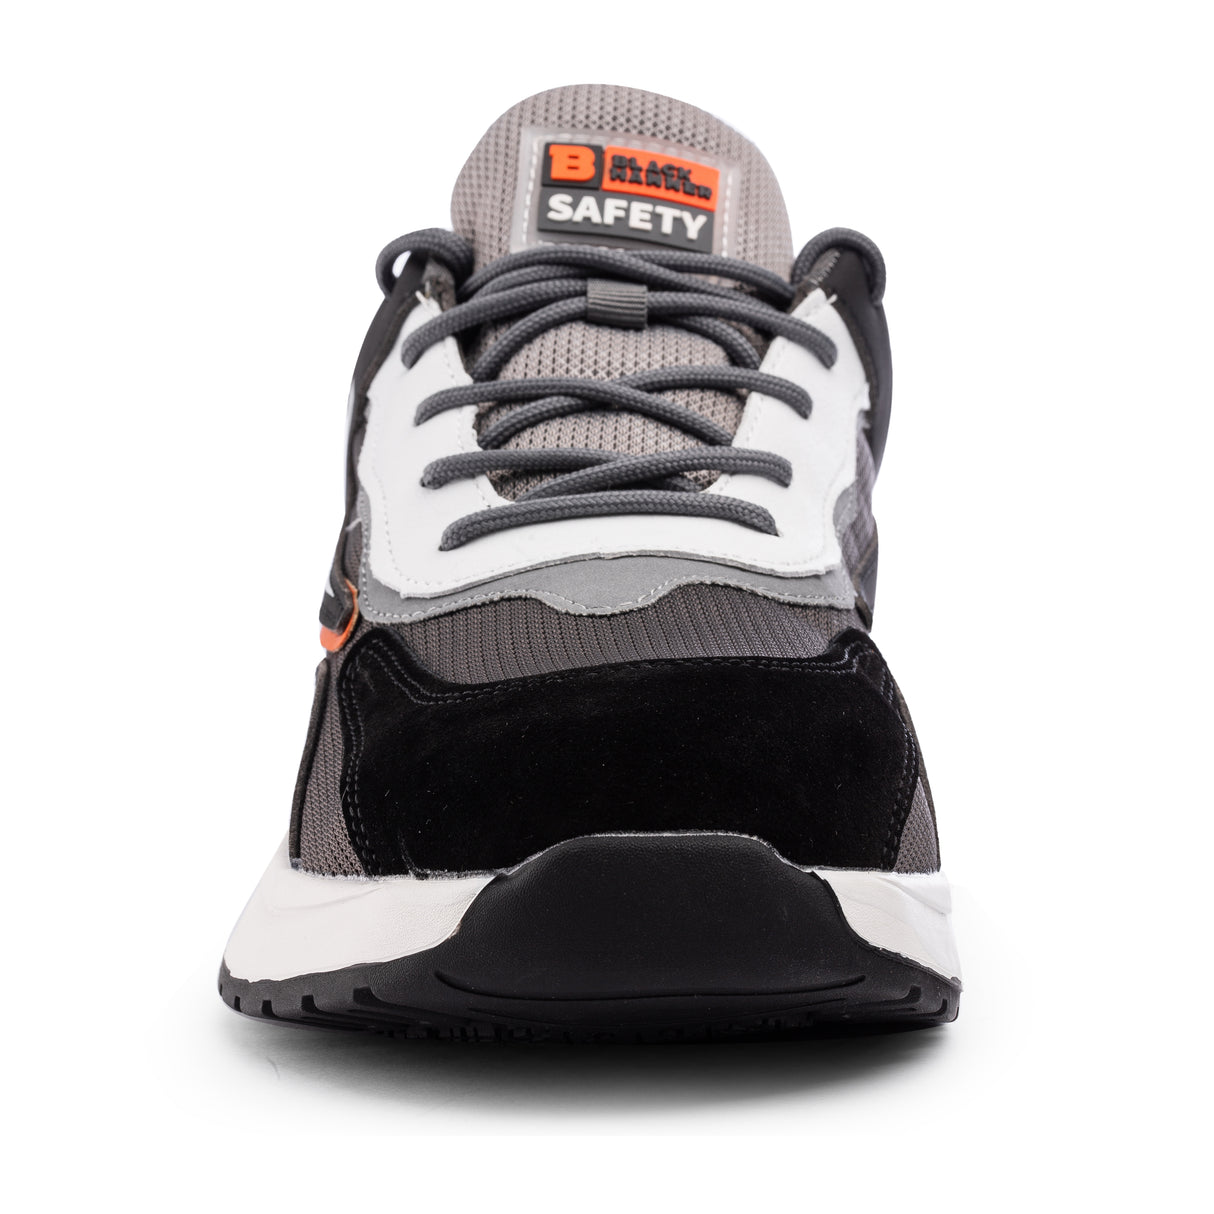 Kevlar midsole safety trainers